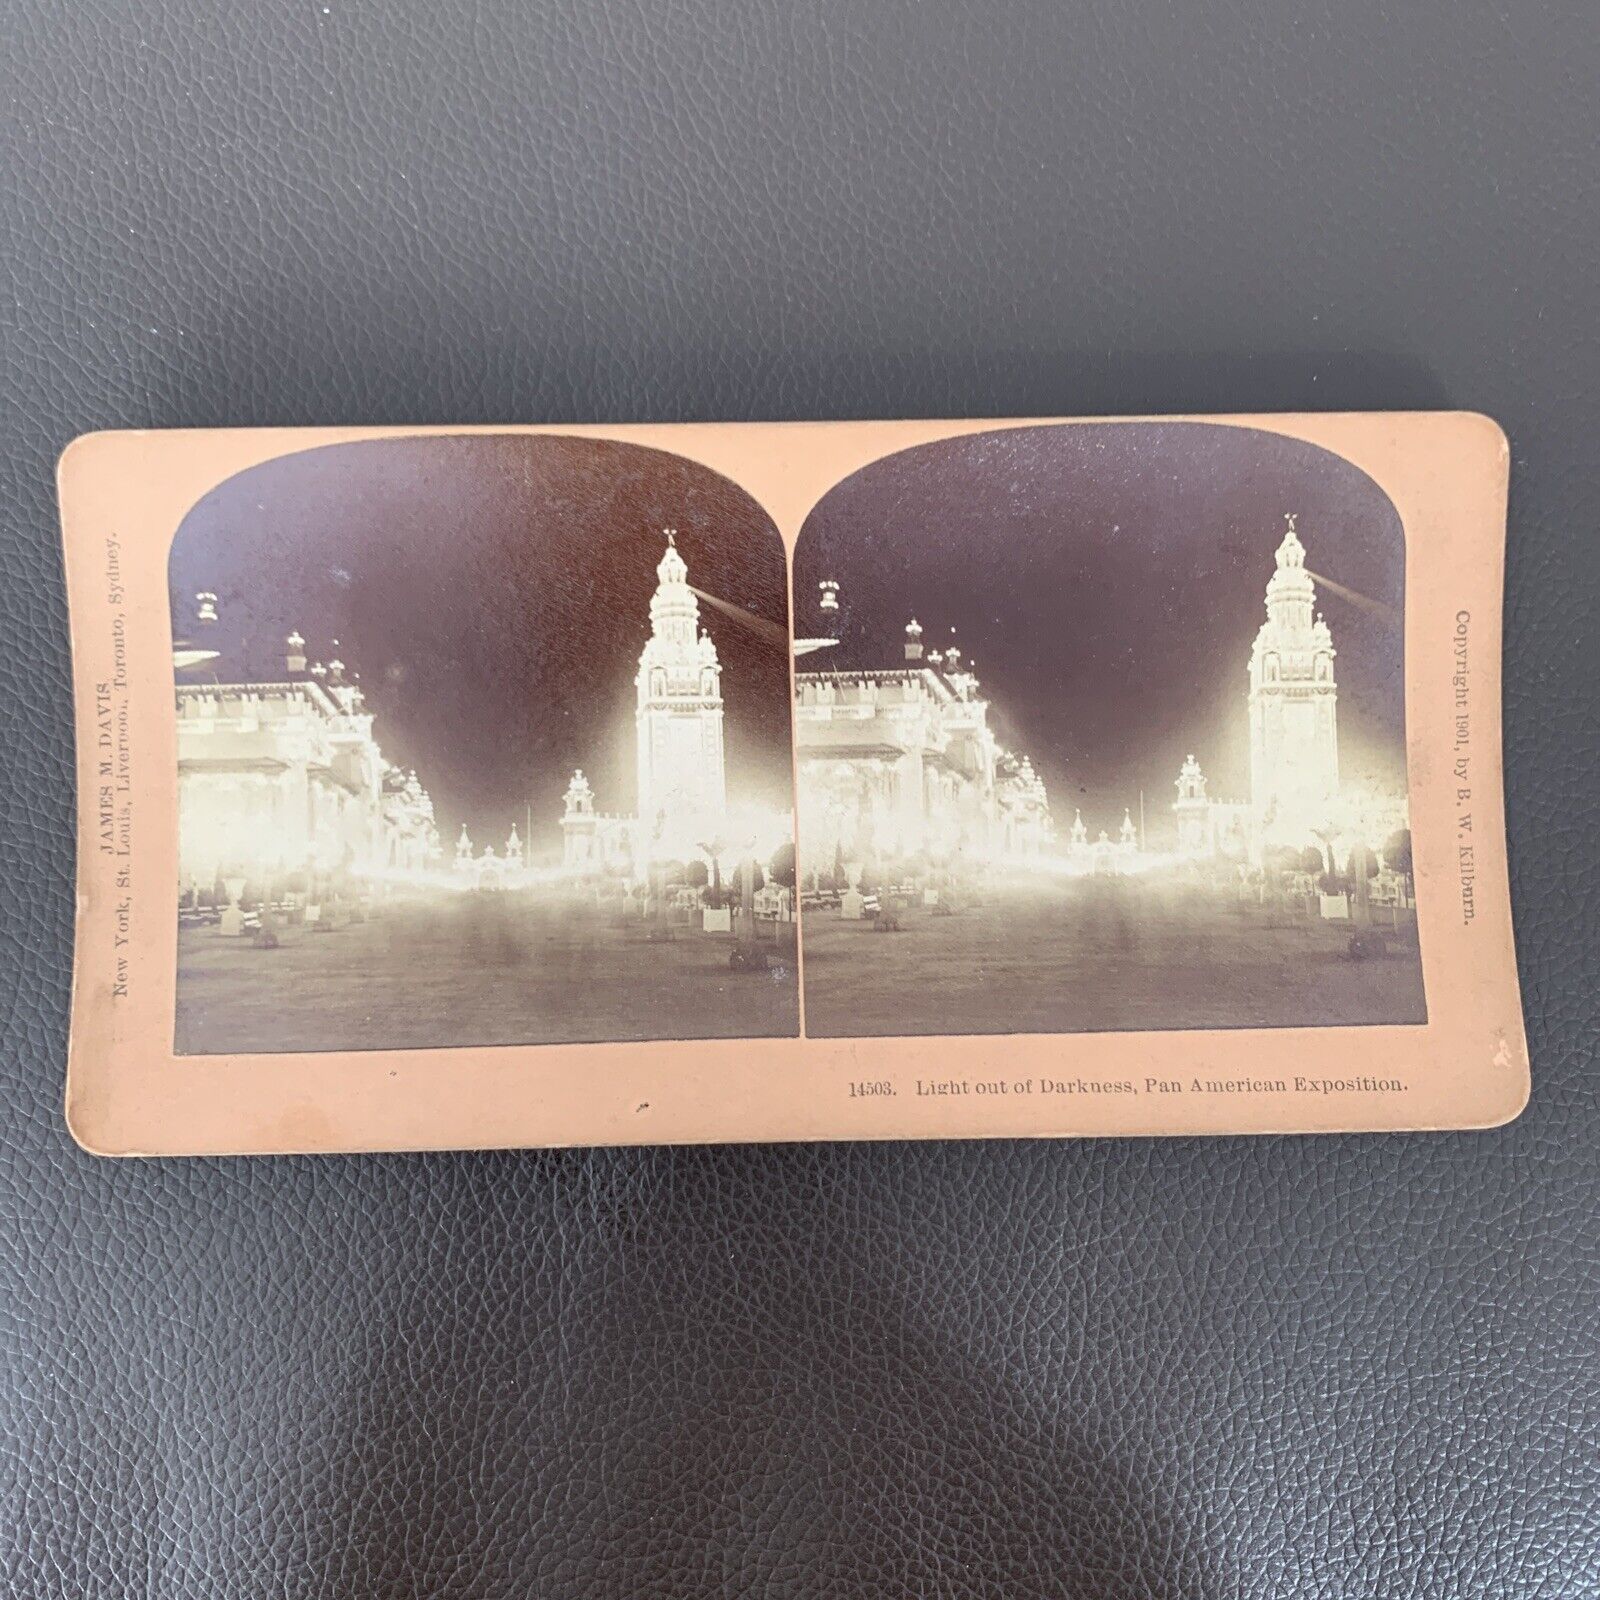 Antique Vintage 1901 Stereoview Card Photo PAN AMERICAN EXPO